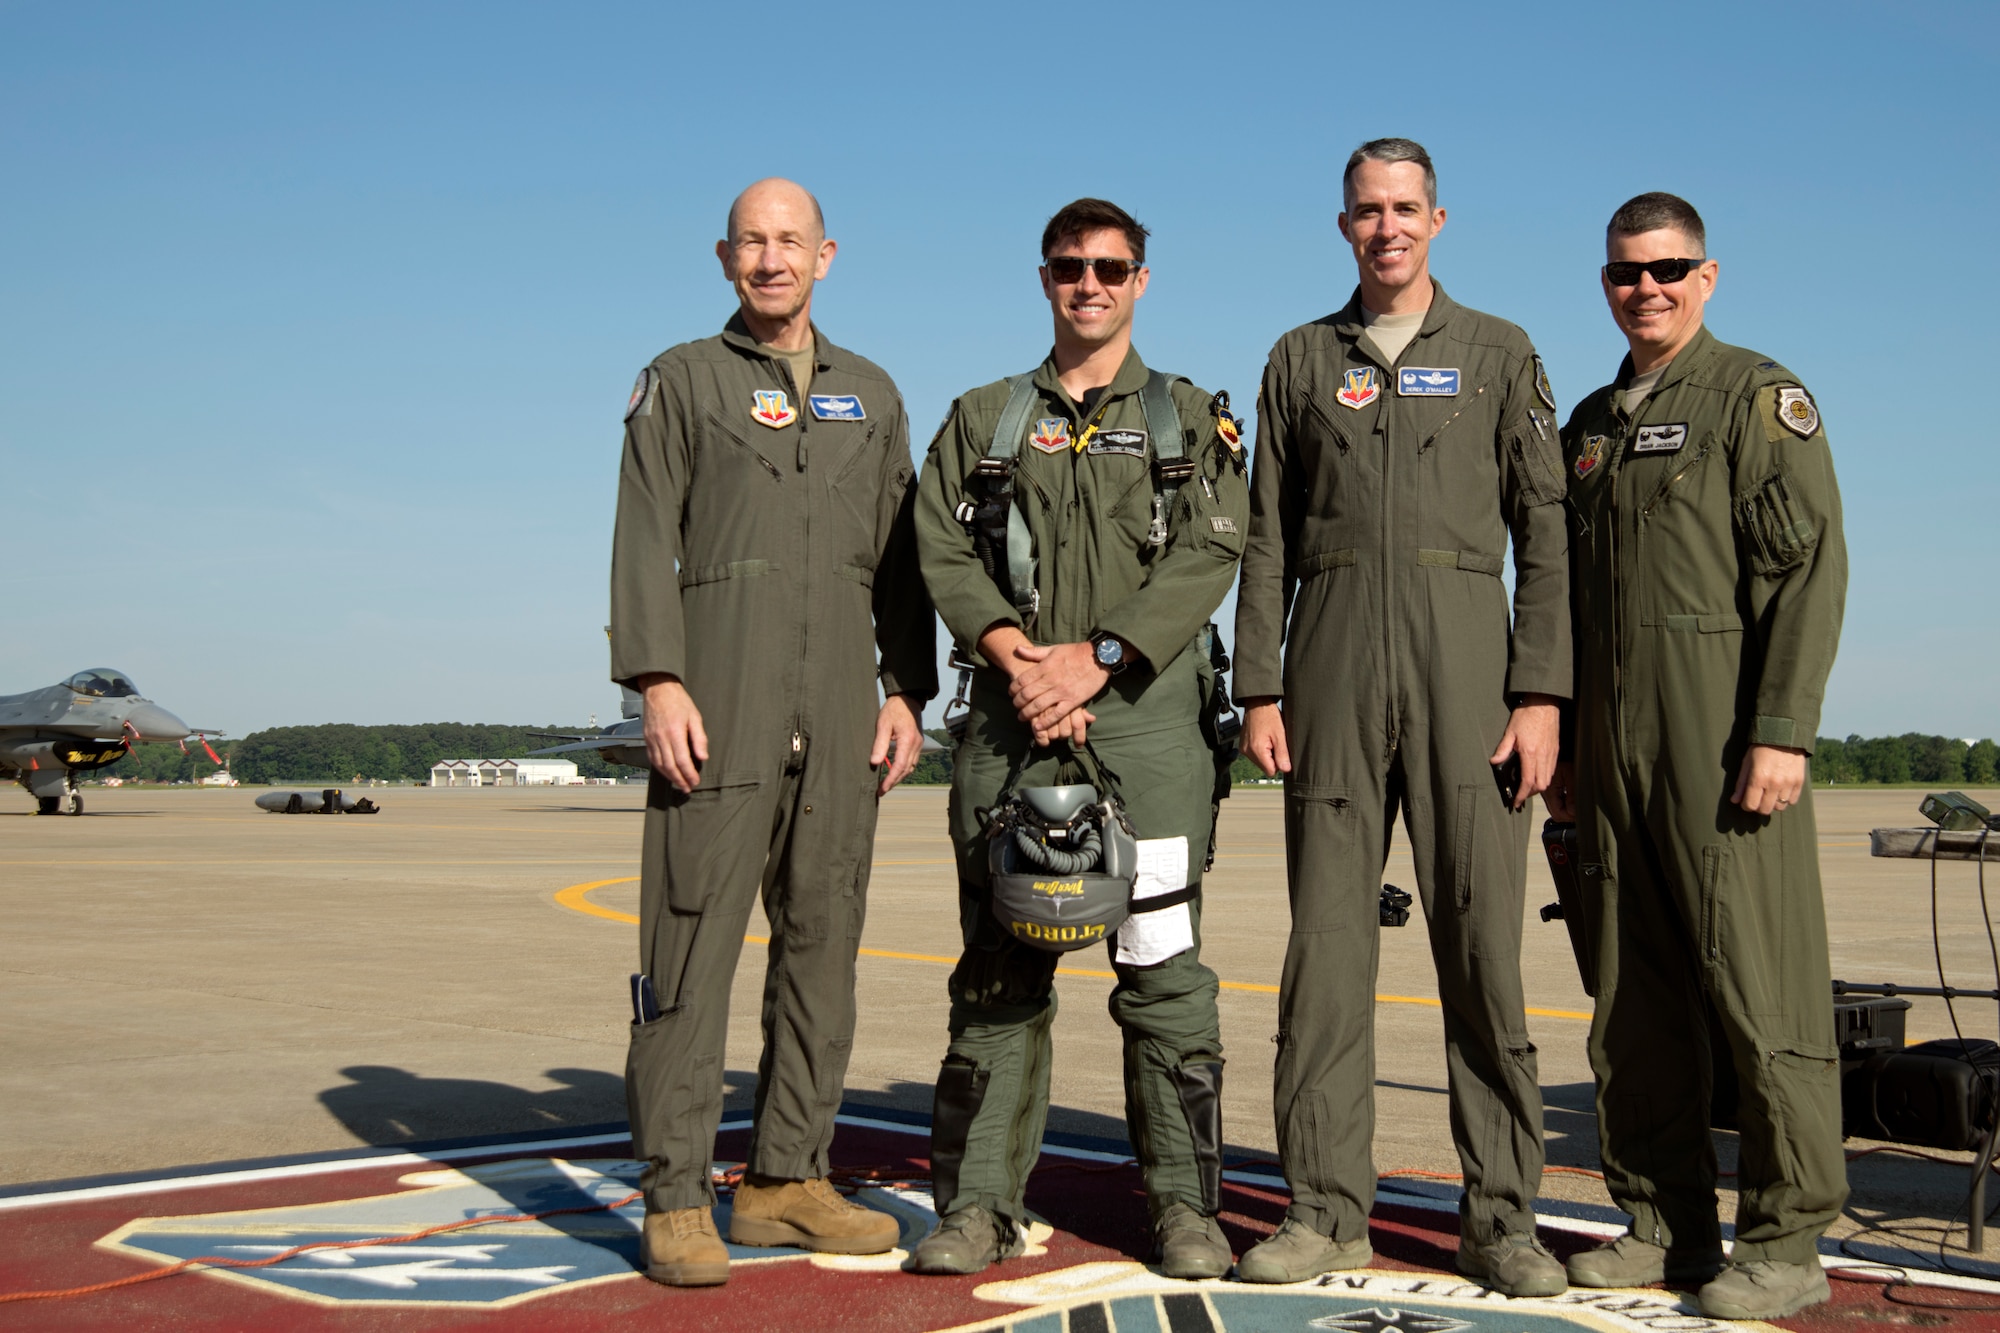 (From left) U.S. Air Force Gen. Mike Holmes, commander of Air Combat Command, Maj. Garret Schmitz, F-16 Viper Demonstration Team commander and pilot, Col. Derek O’Malley, 20th Fighter Wing commander, and Col. Brian Jackson, 20th Operations Group commander, stand for a photo at Joint Base Langley-Eustis, Va., May 16, 2019.